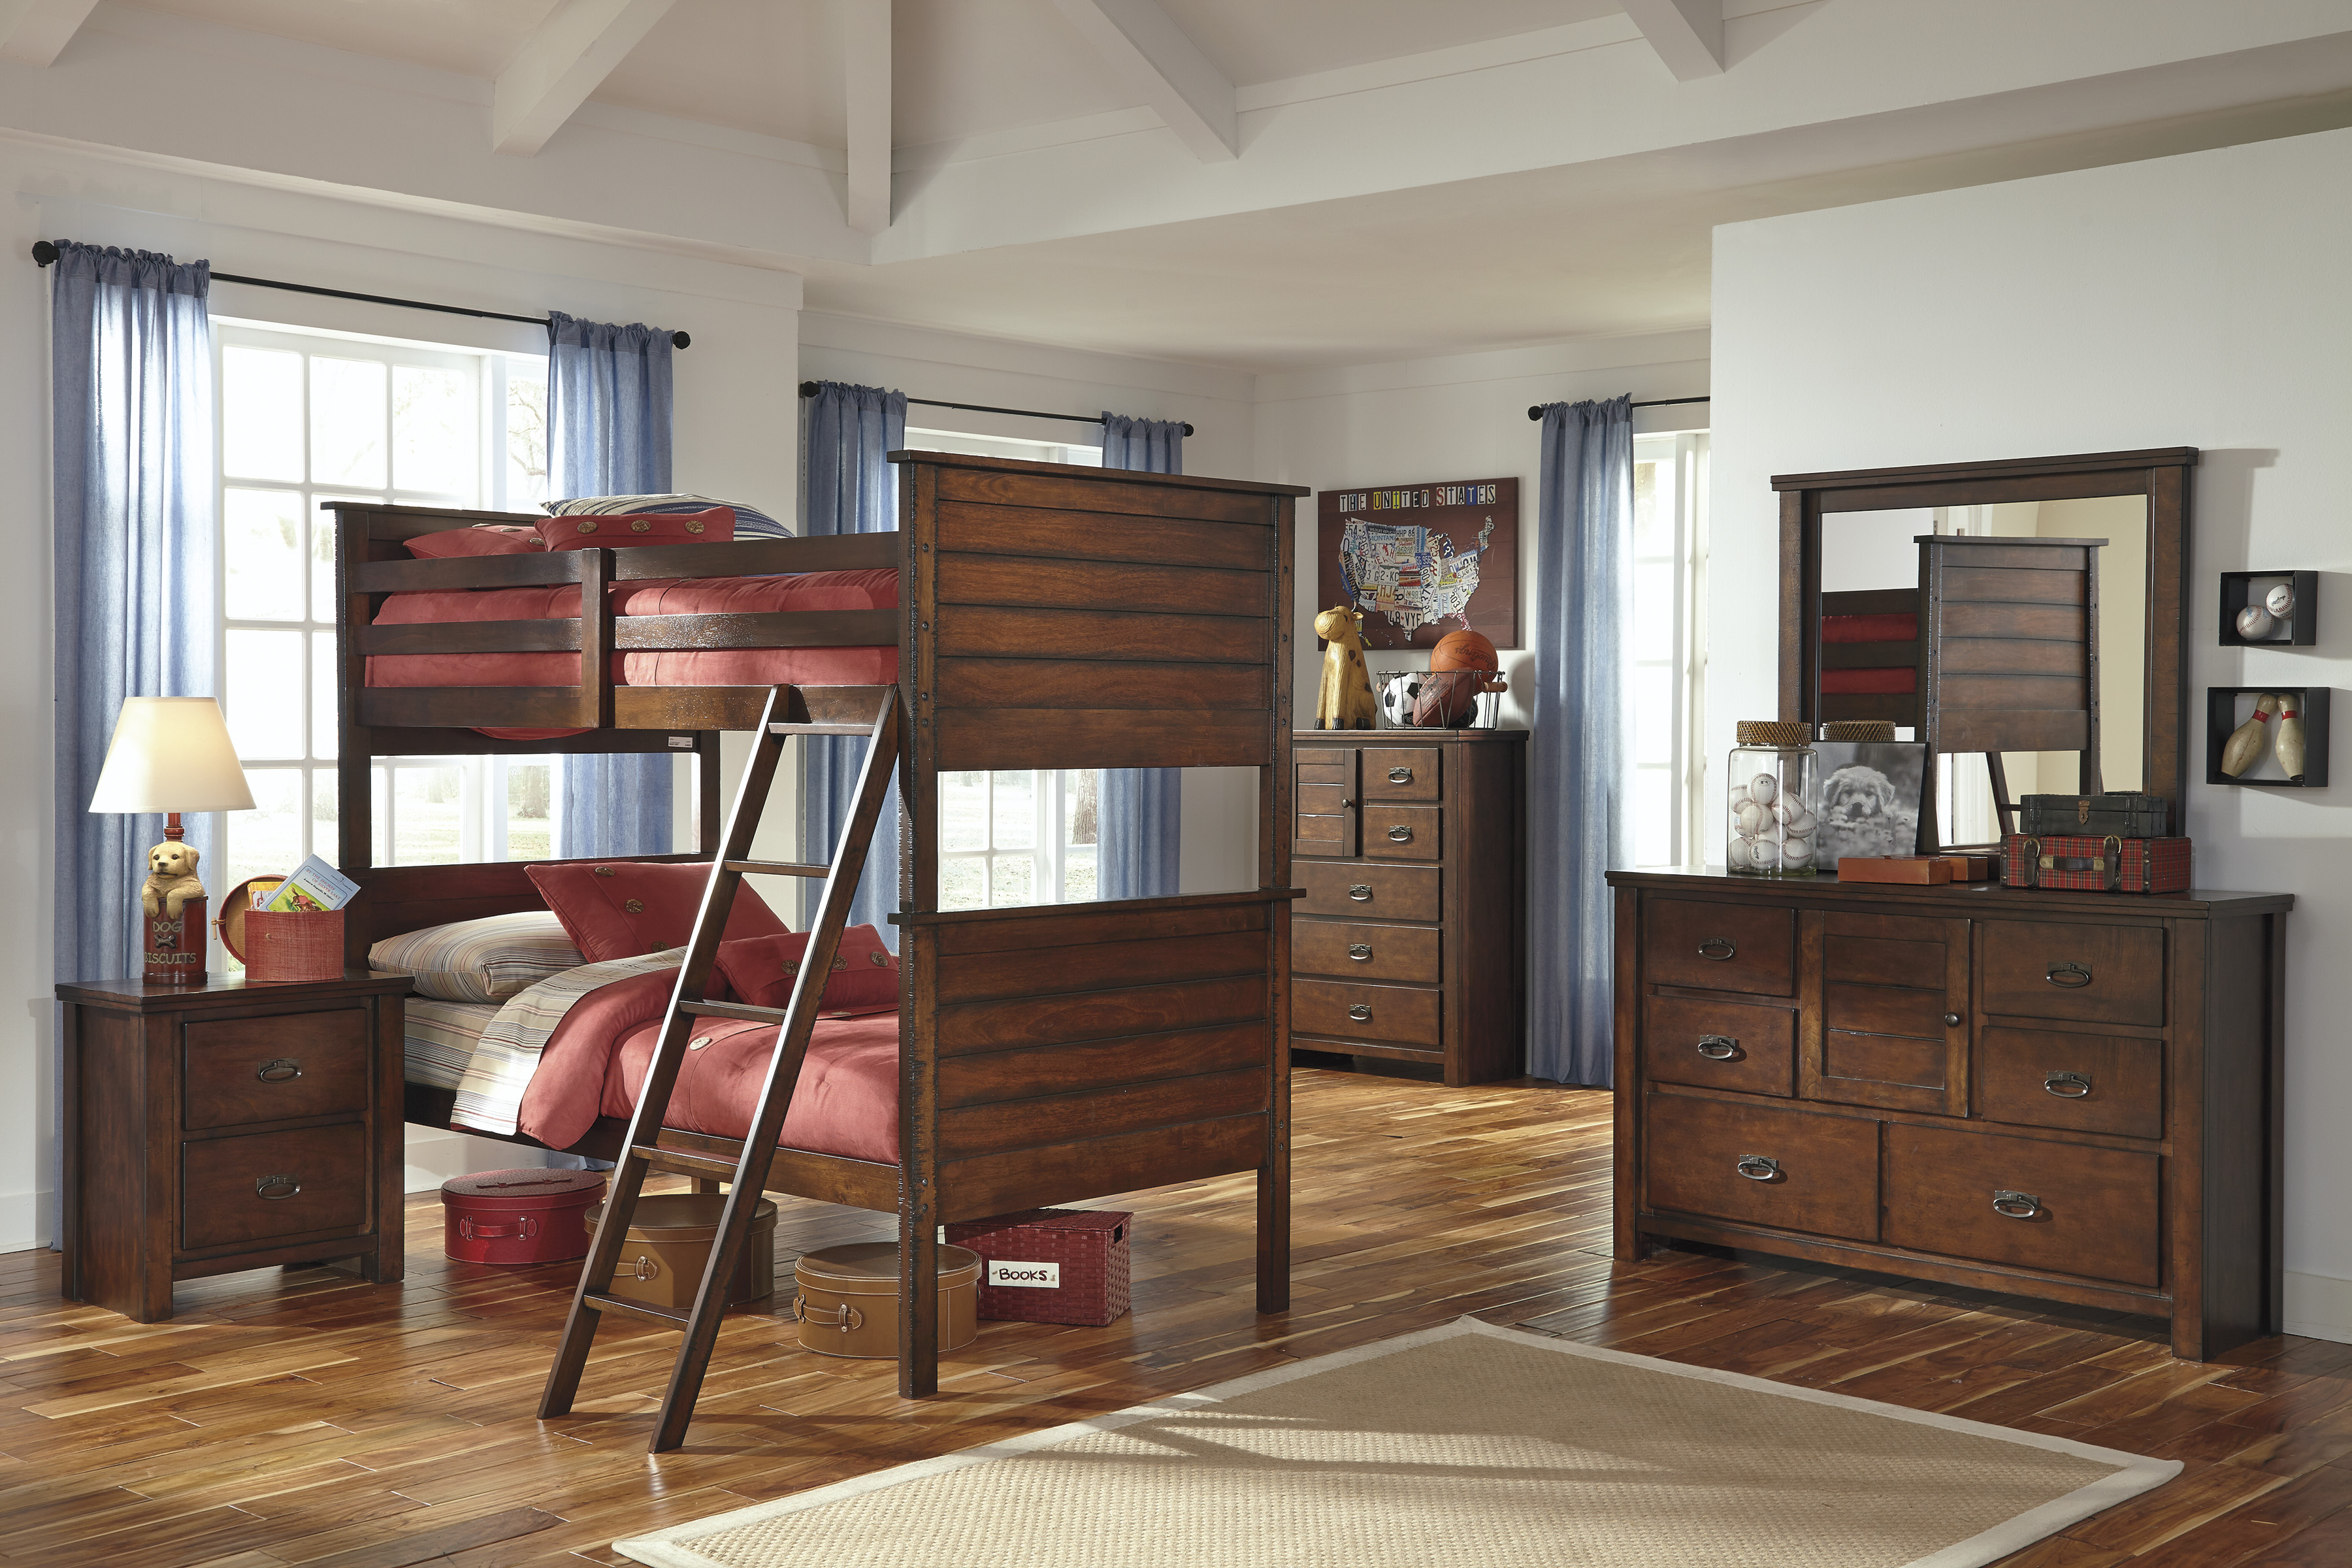 Bunkbed by Crate Designs